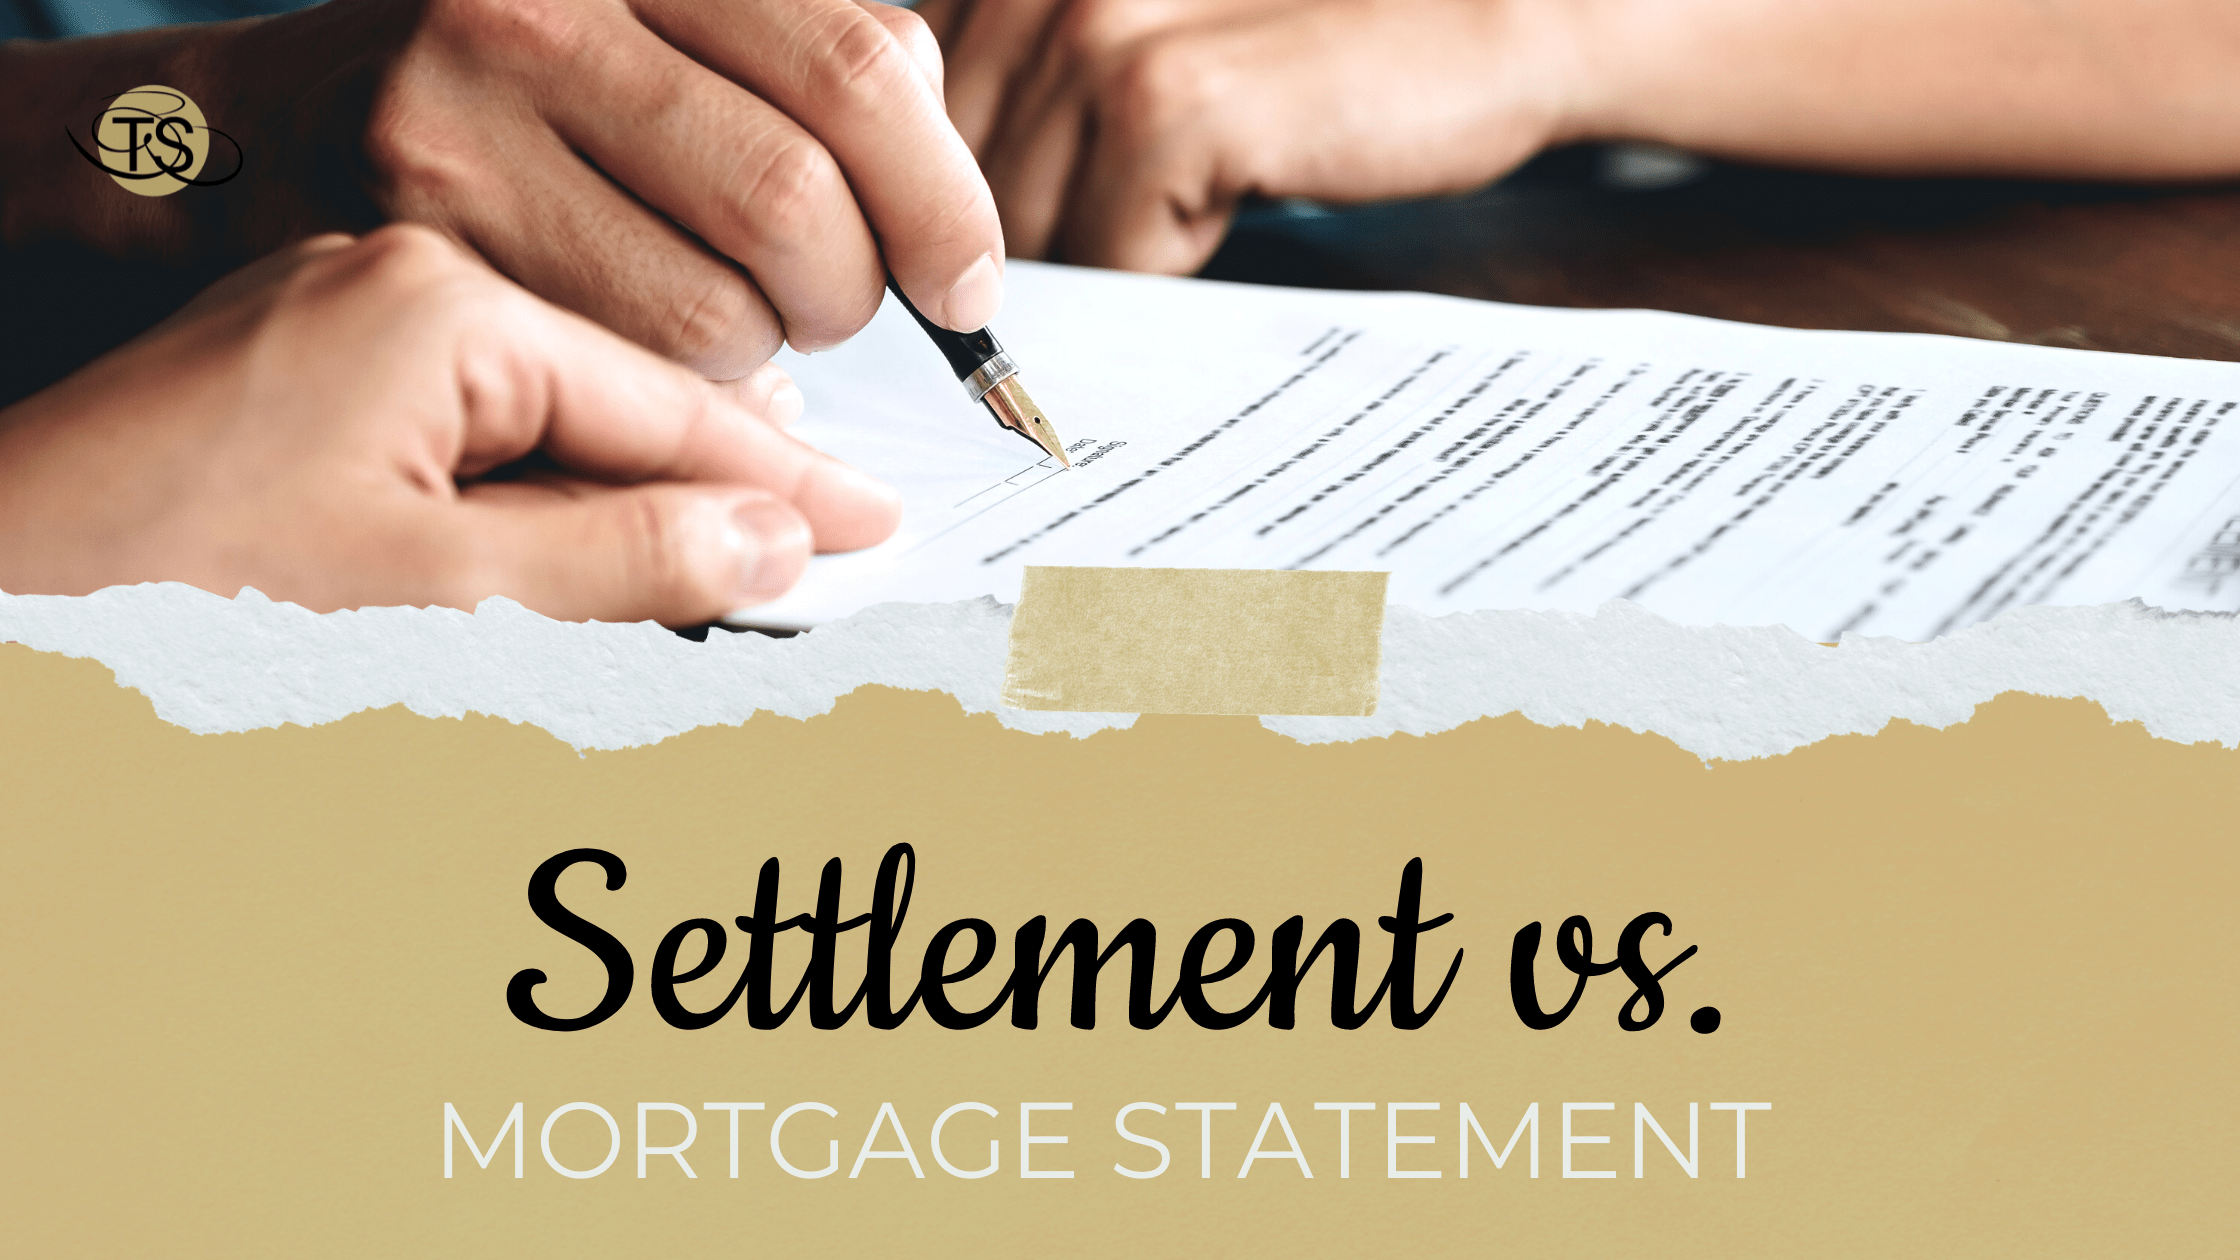 Settlement vs. Mortgage Statements: Why is the payoff on my settlement statement higher than the balance on my mortgage statement?